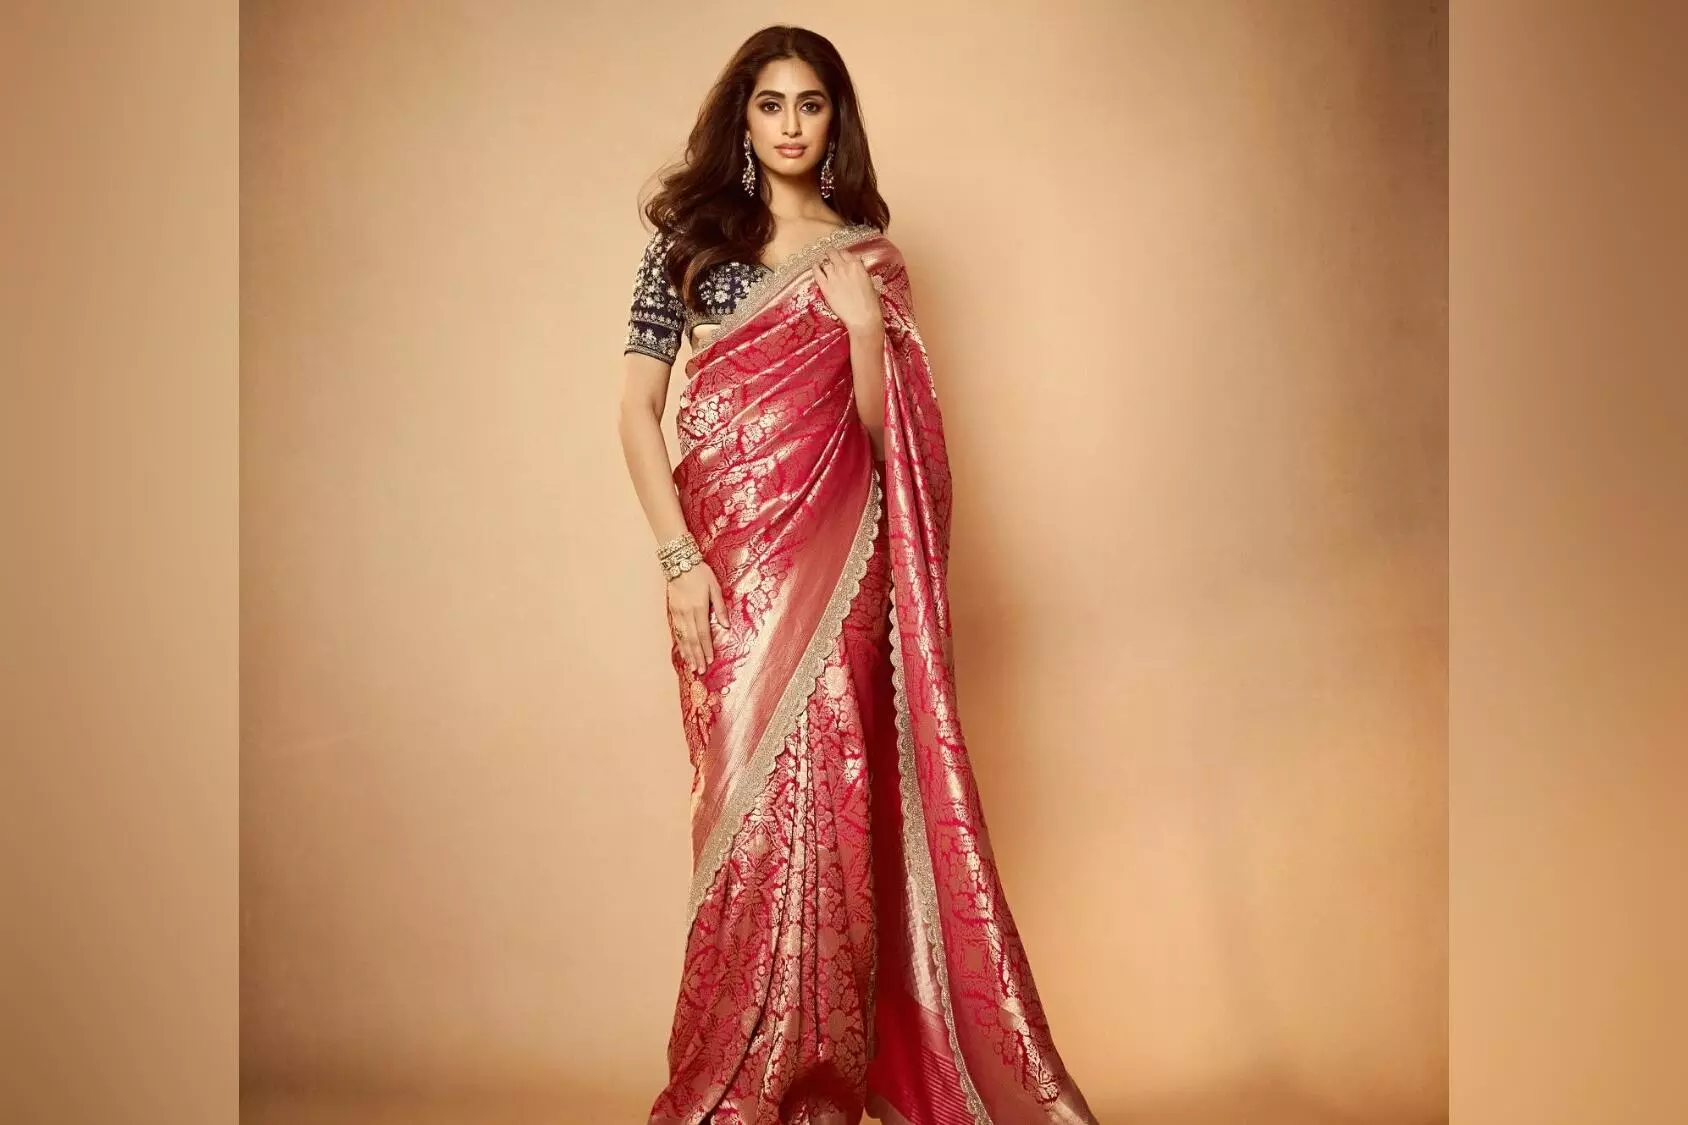 71st Miss India: Sini Shetty showcases traditional culture, walks the ramp with Rs 2.2 lakh sari